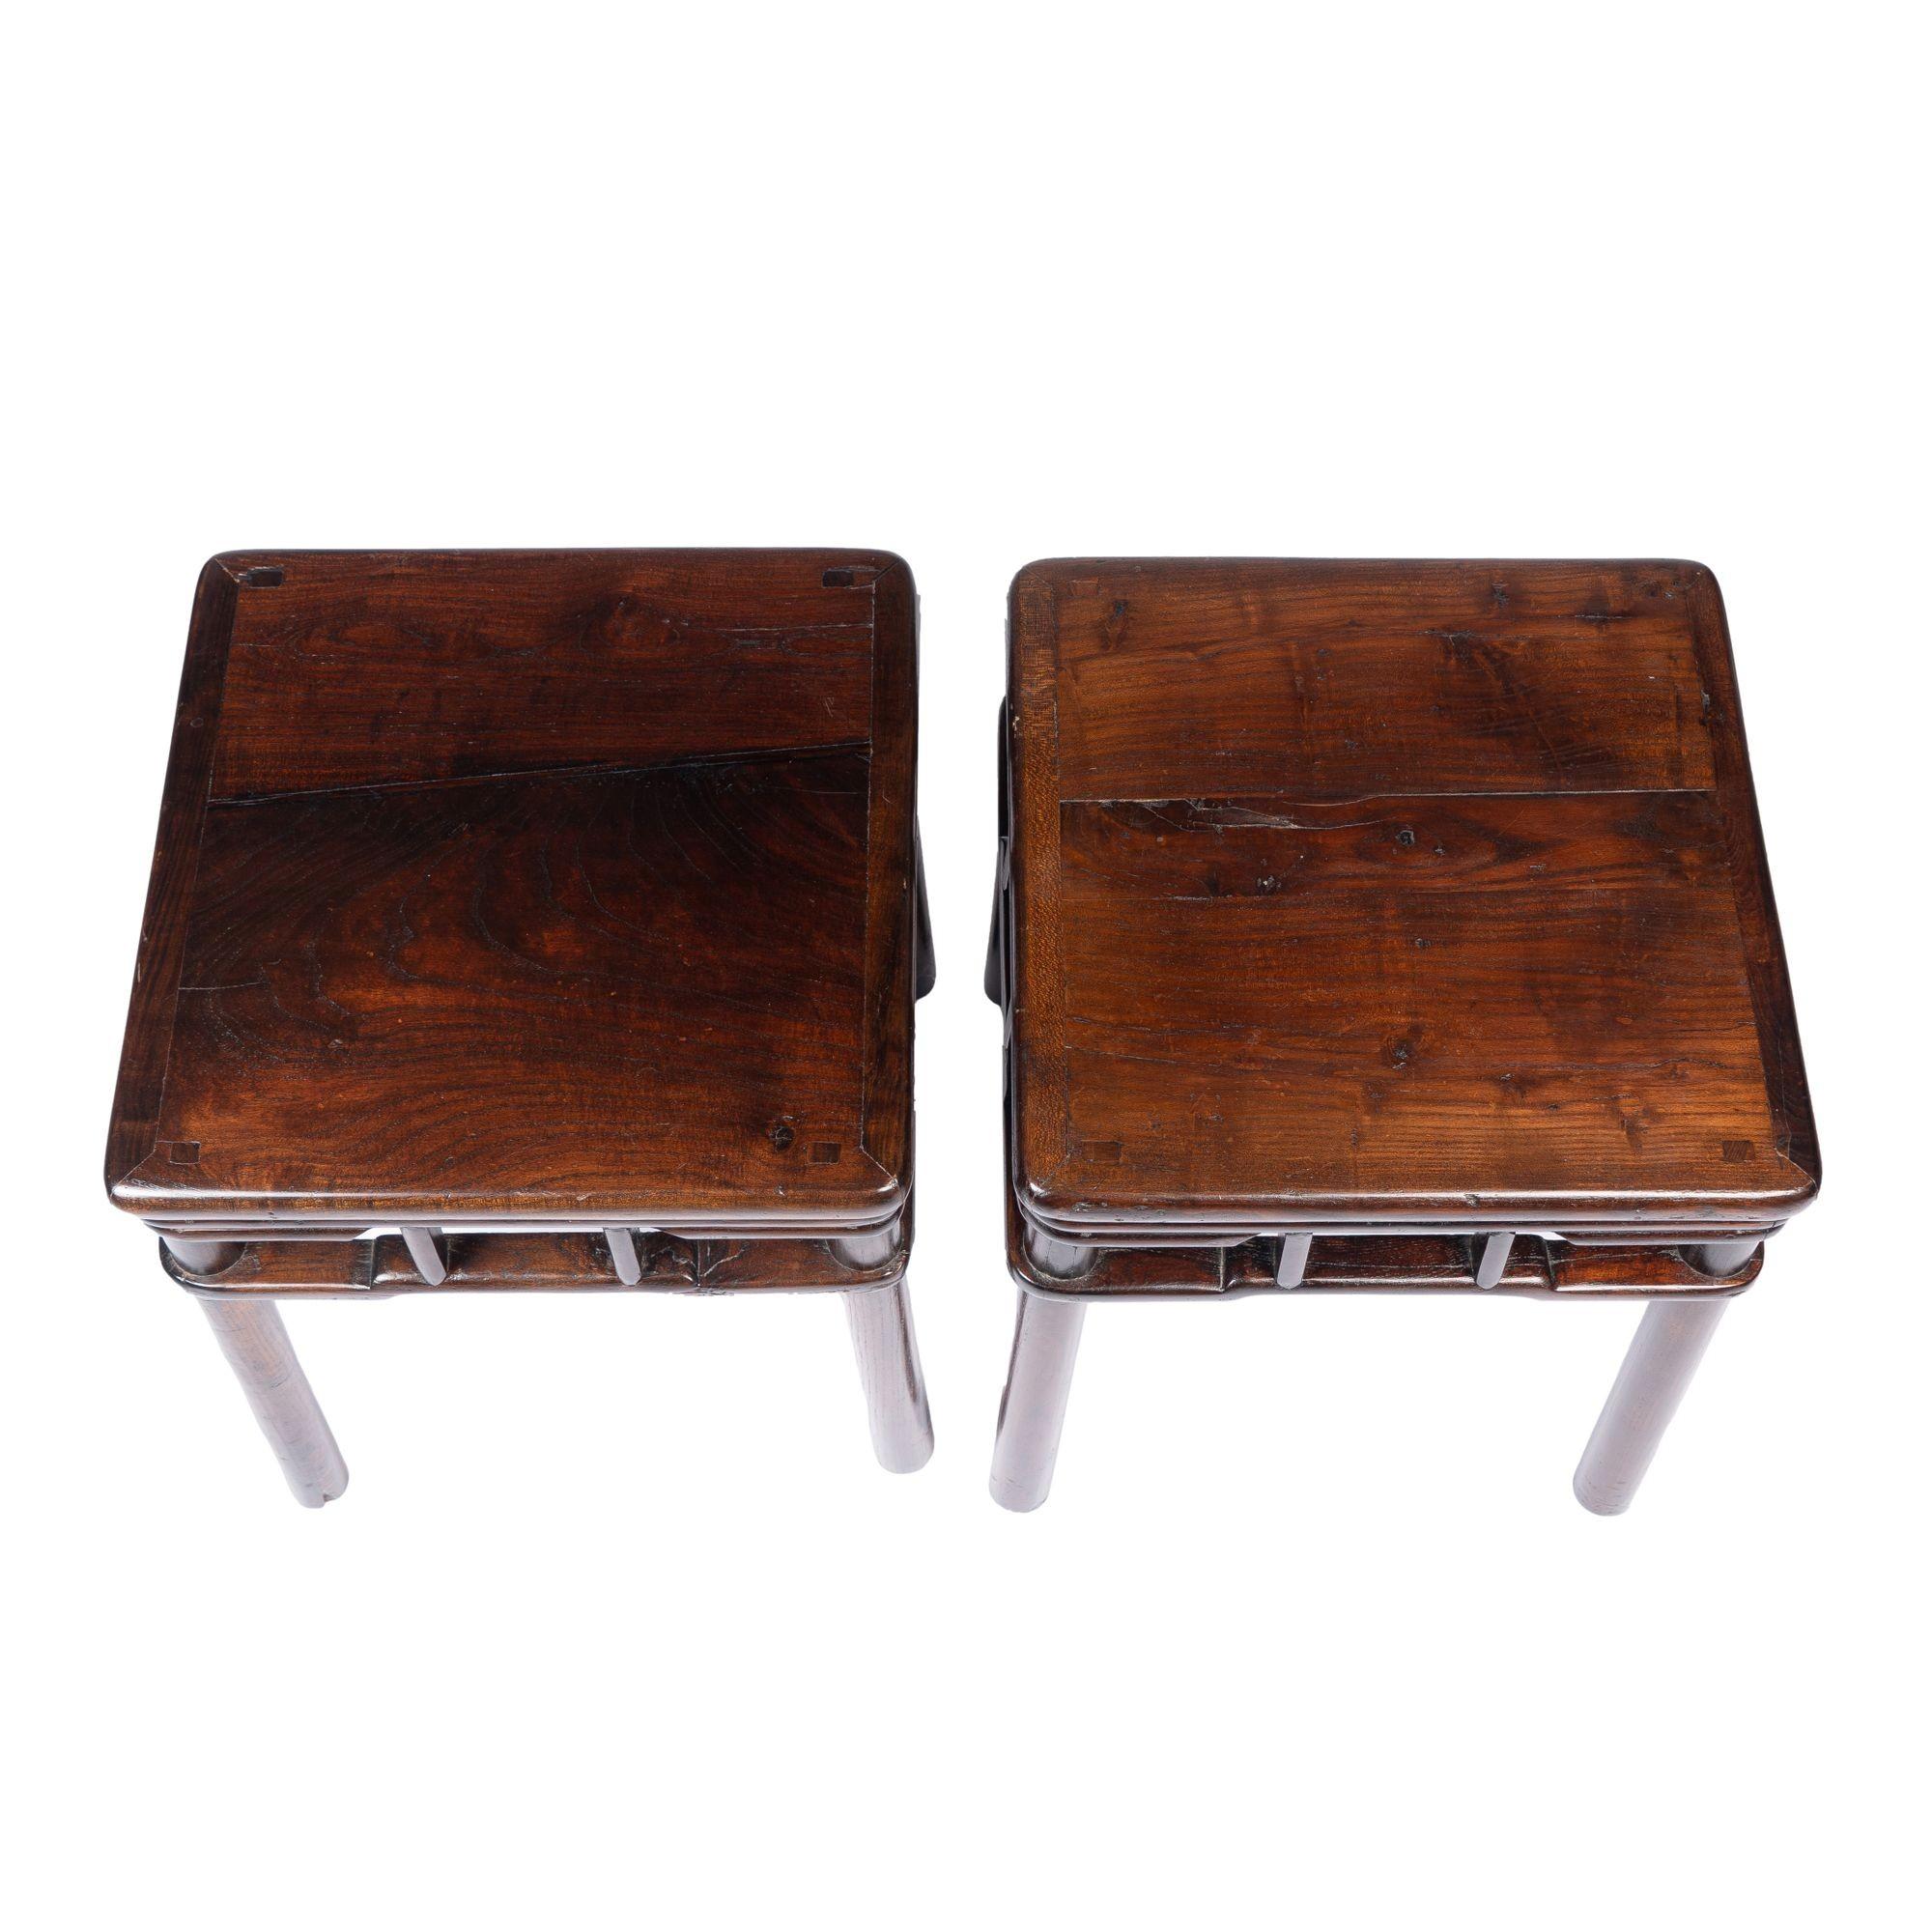 Pair of Chinese Elm Stools with Hump Back Rail, 1780-1820 For Sale 7